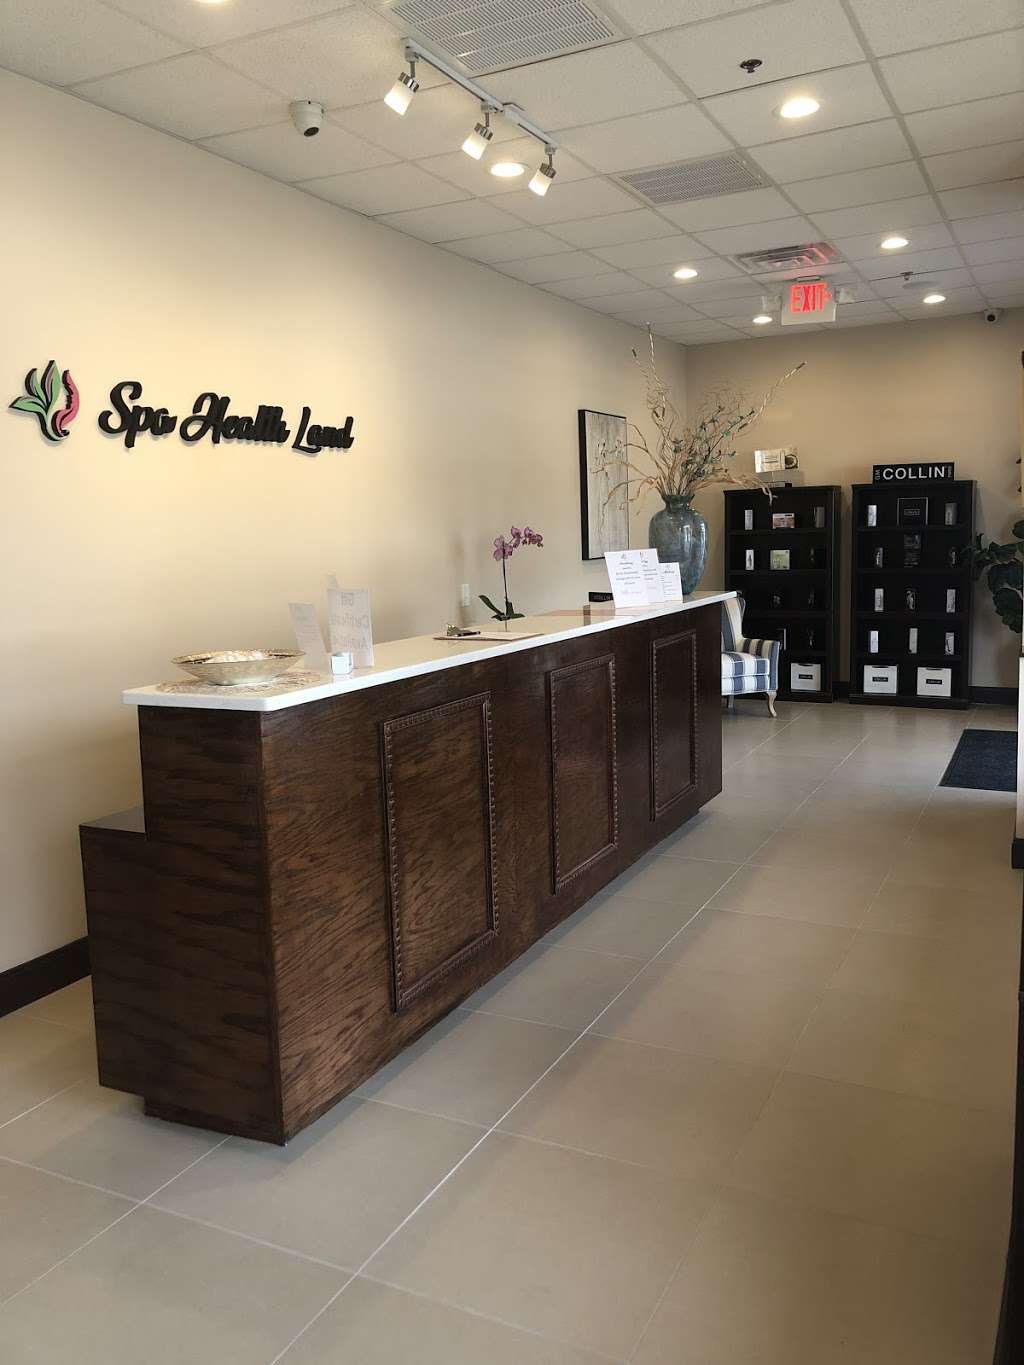 Asian Massage in Green Brook NJ | Health Land Day Spa - spa  | Photo 5 of 10 | Address: 299 US Hwy 22 East, Green Brook Township, NJ 08812, USA | Phone: (732) 624-9303